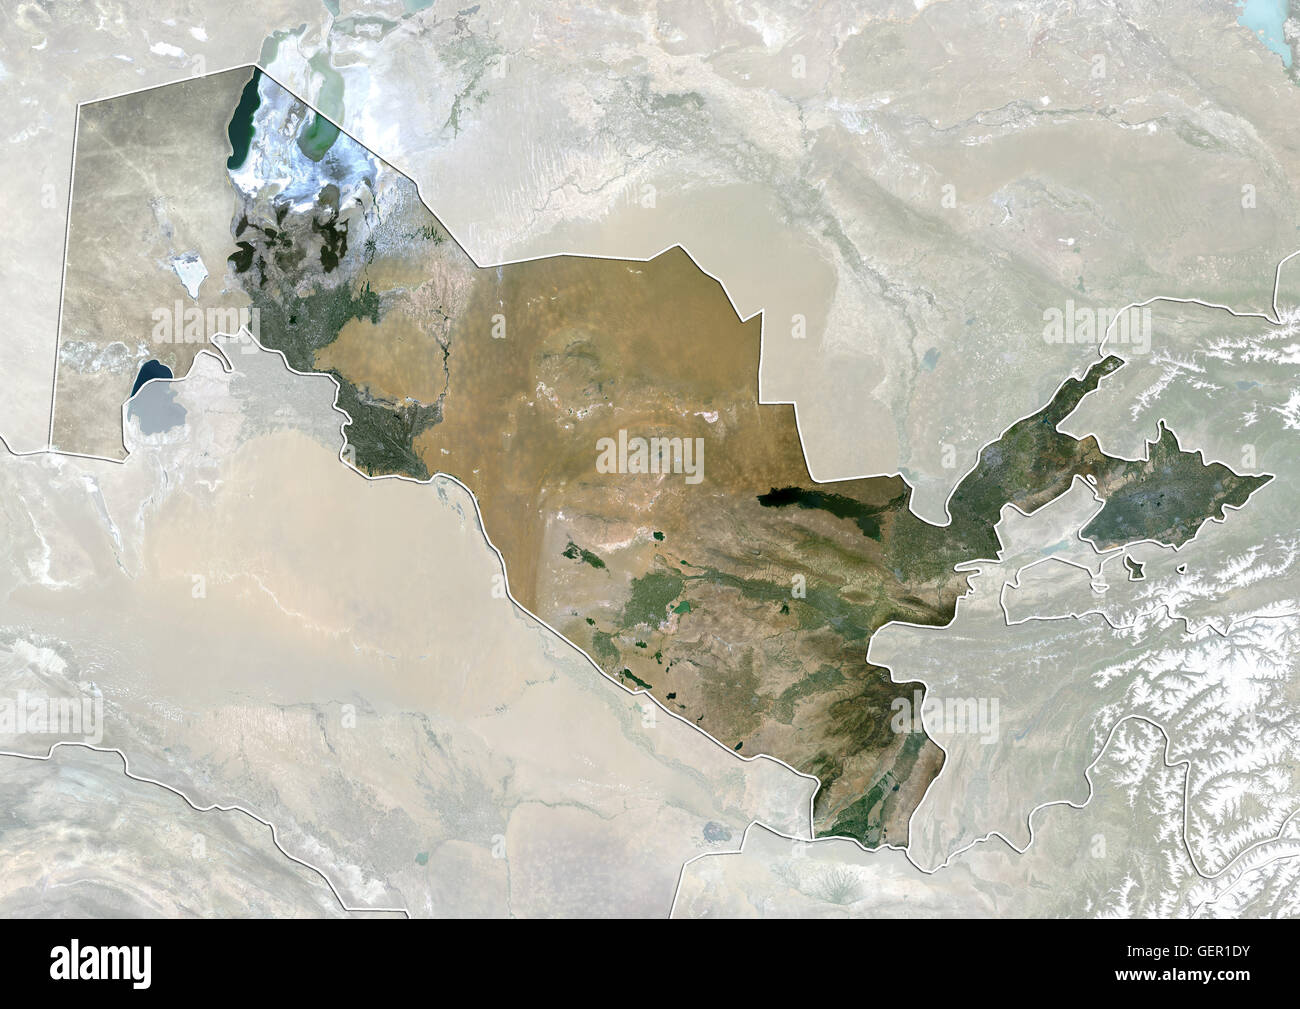 Satellite view of Uzbekistan (with country boundaries and mask). This image was compiled from data acquired by Landsat 8 satellite in 2014. Stock Photo